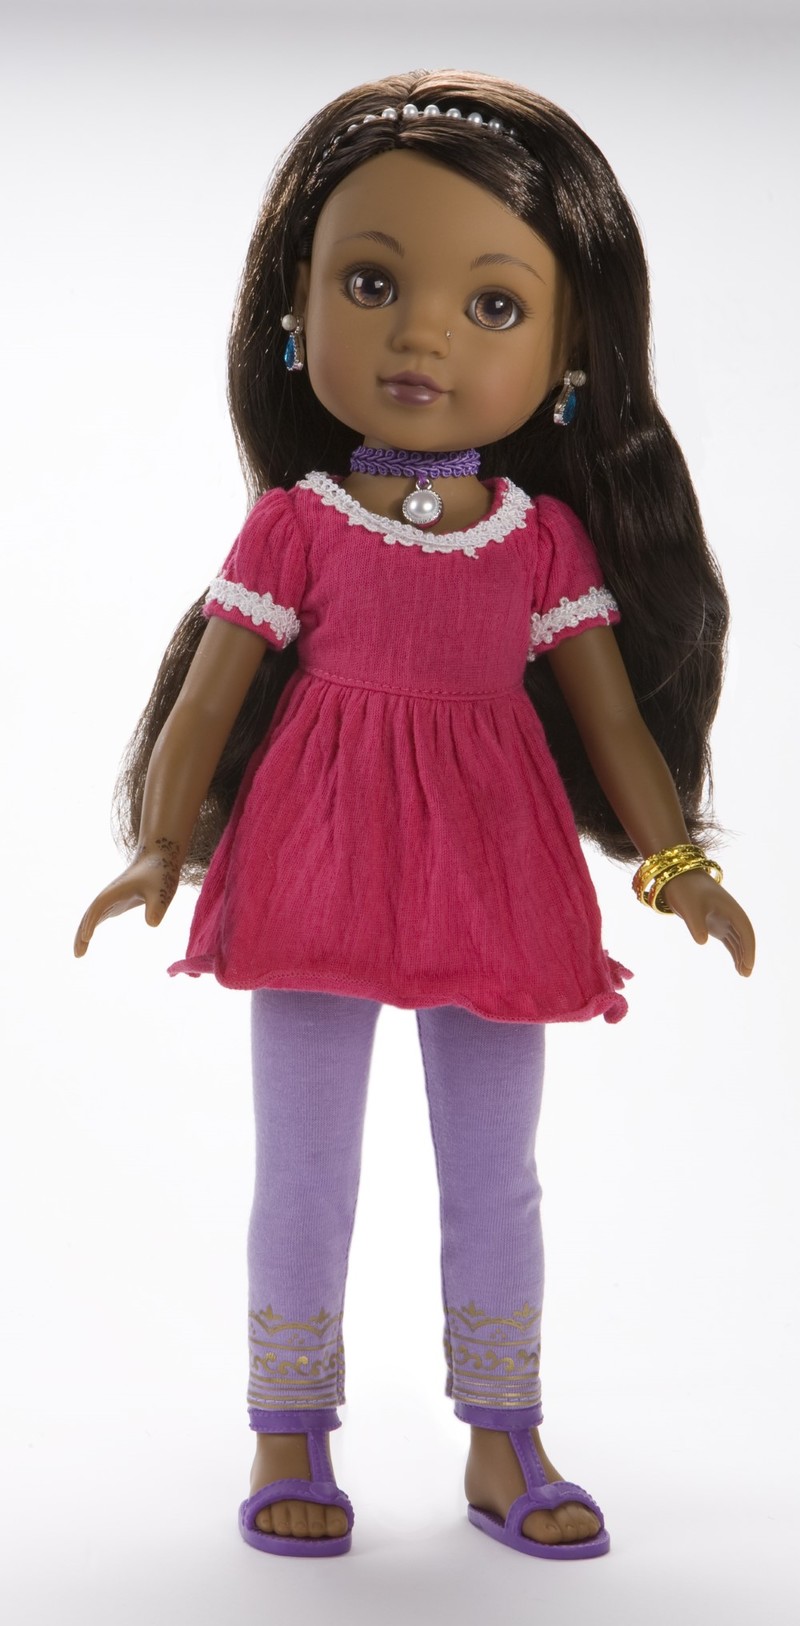 Hearts for Hearts Girls Doll - Nahji from India